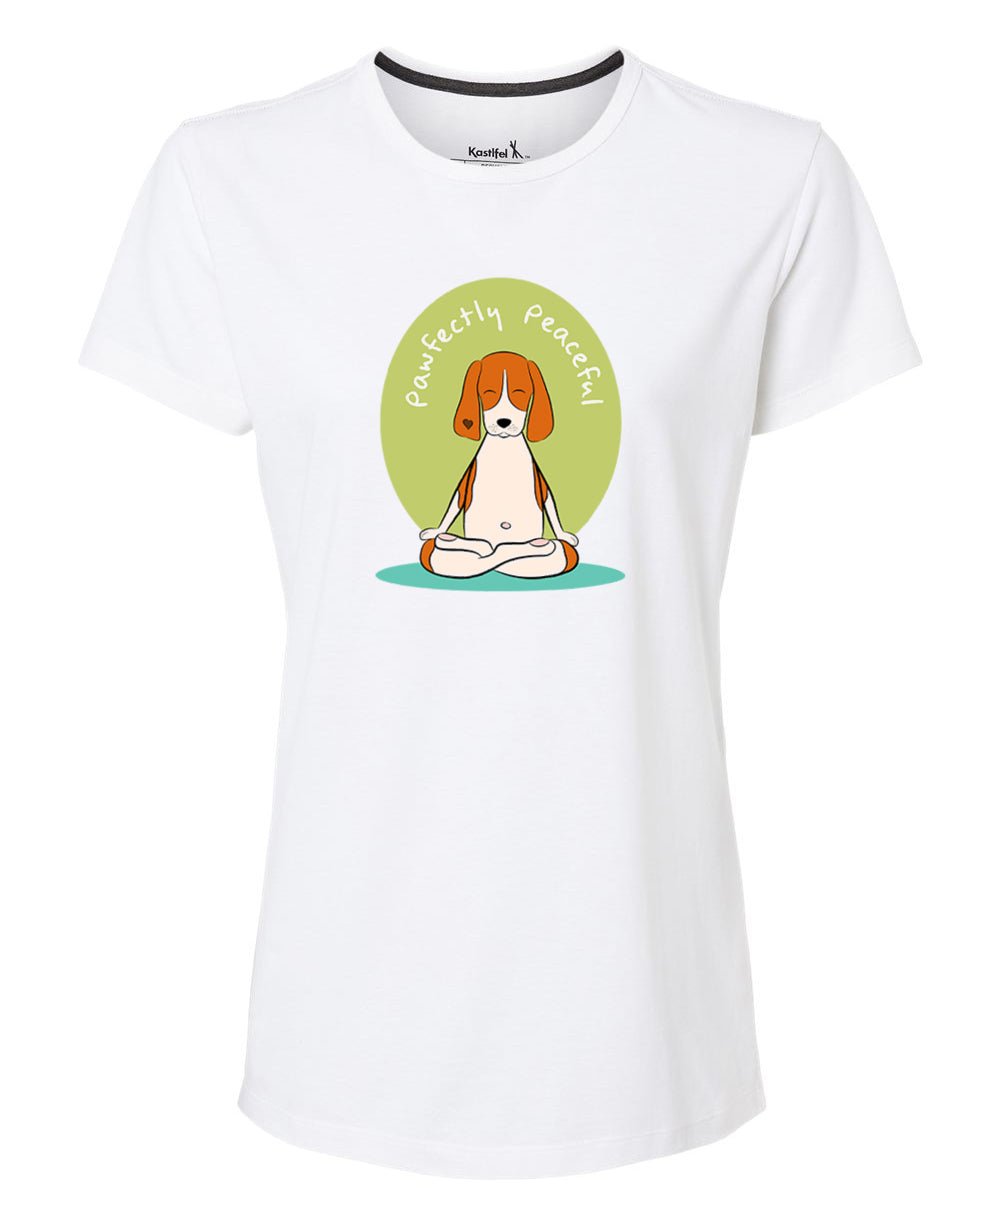 Paw-fectly Perfect Women's Recycled Yoga Dog T-Shirt - Shirts & Tops S